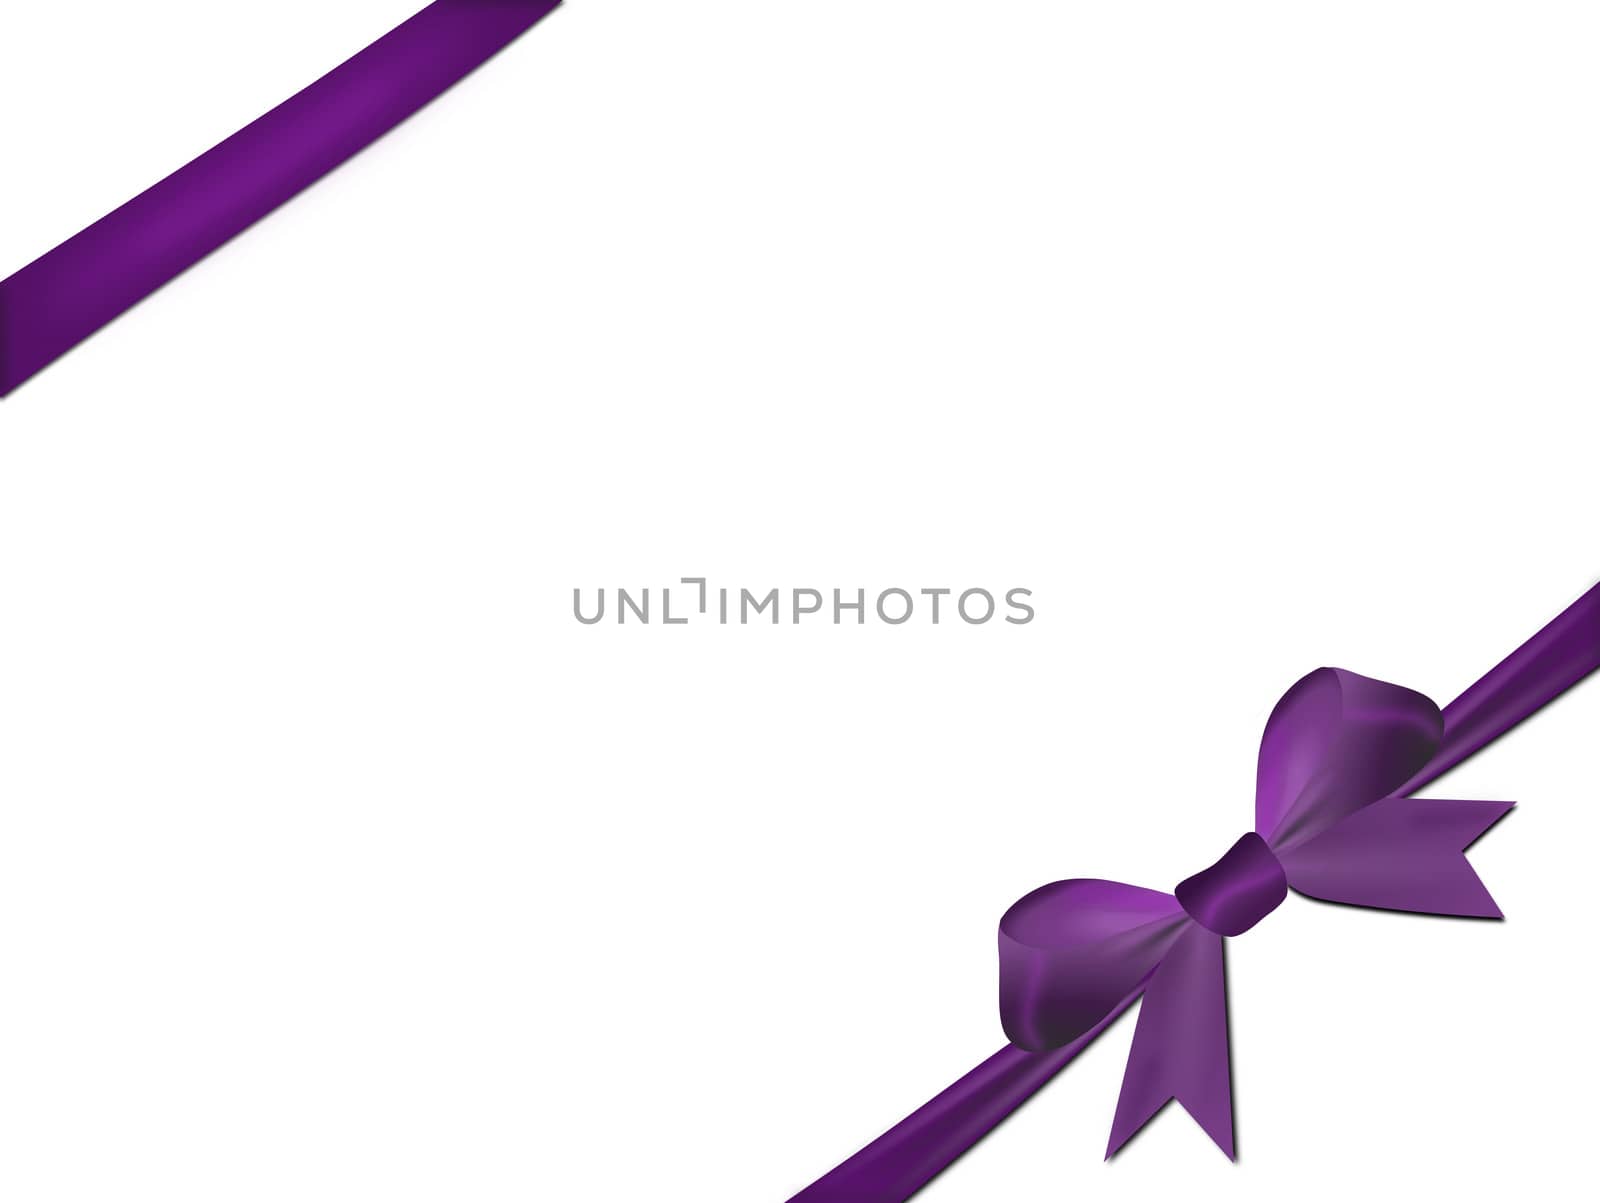 Purple bow isolated on a white background